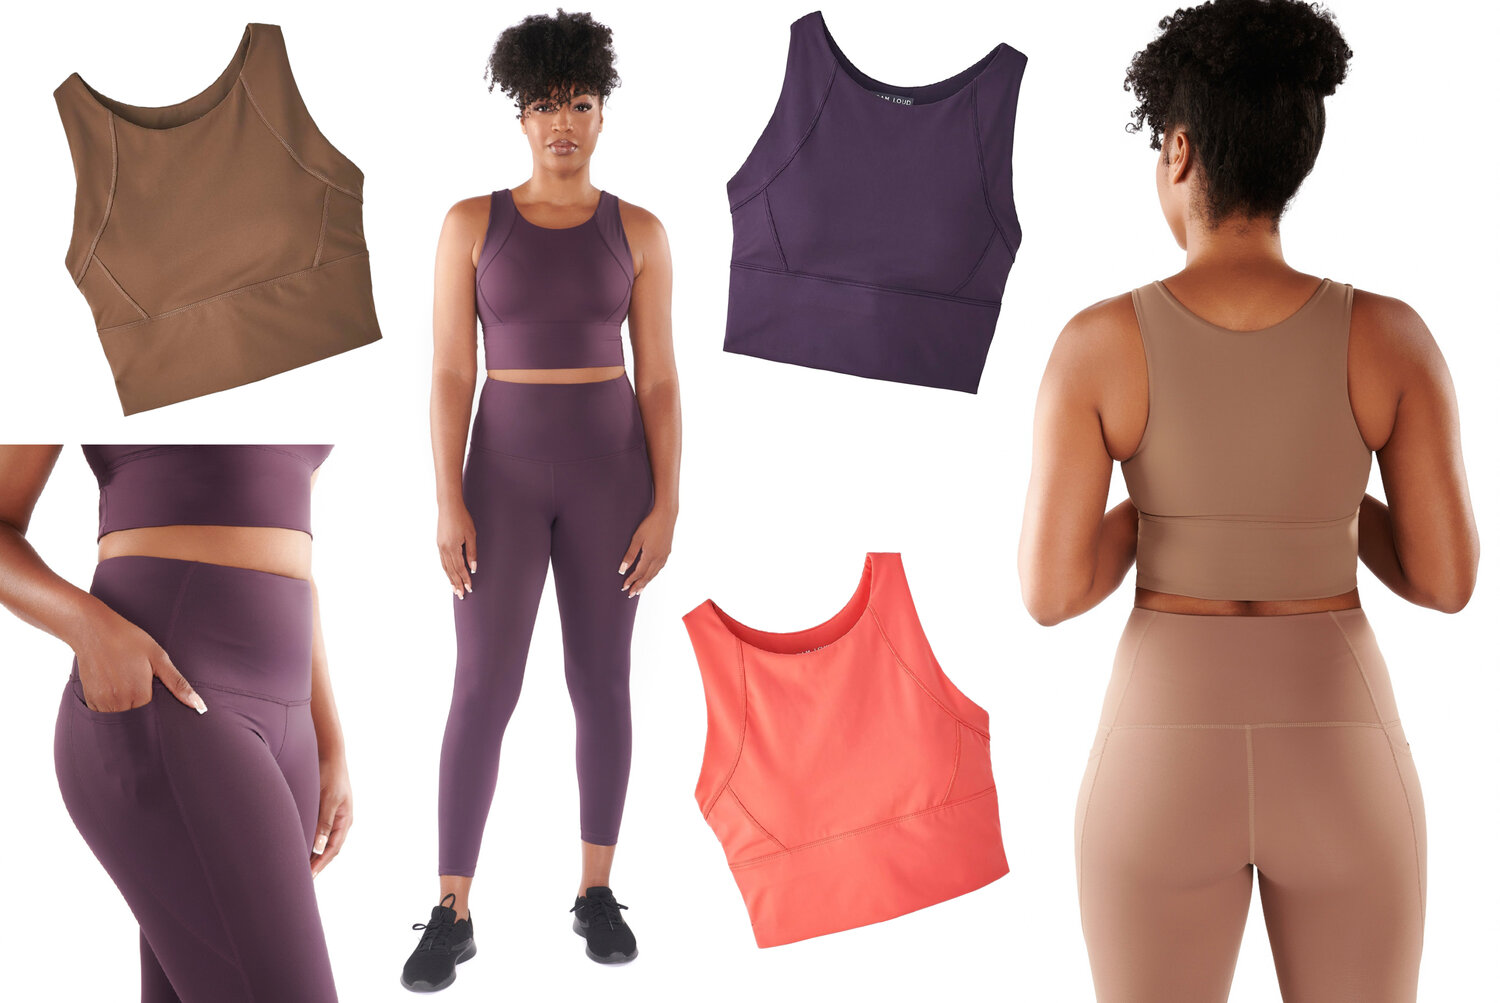 SHOP: See Why this PVD-Based Athleisure Brand is One of Oprah's